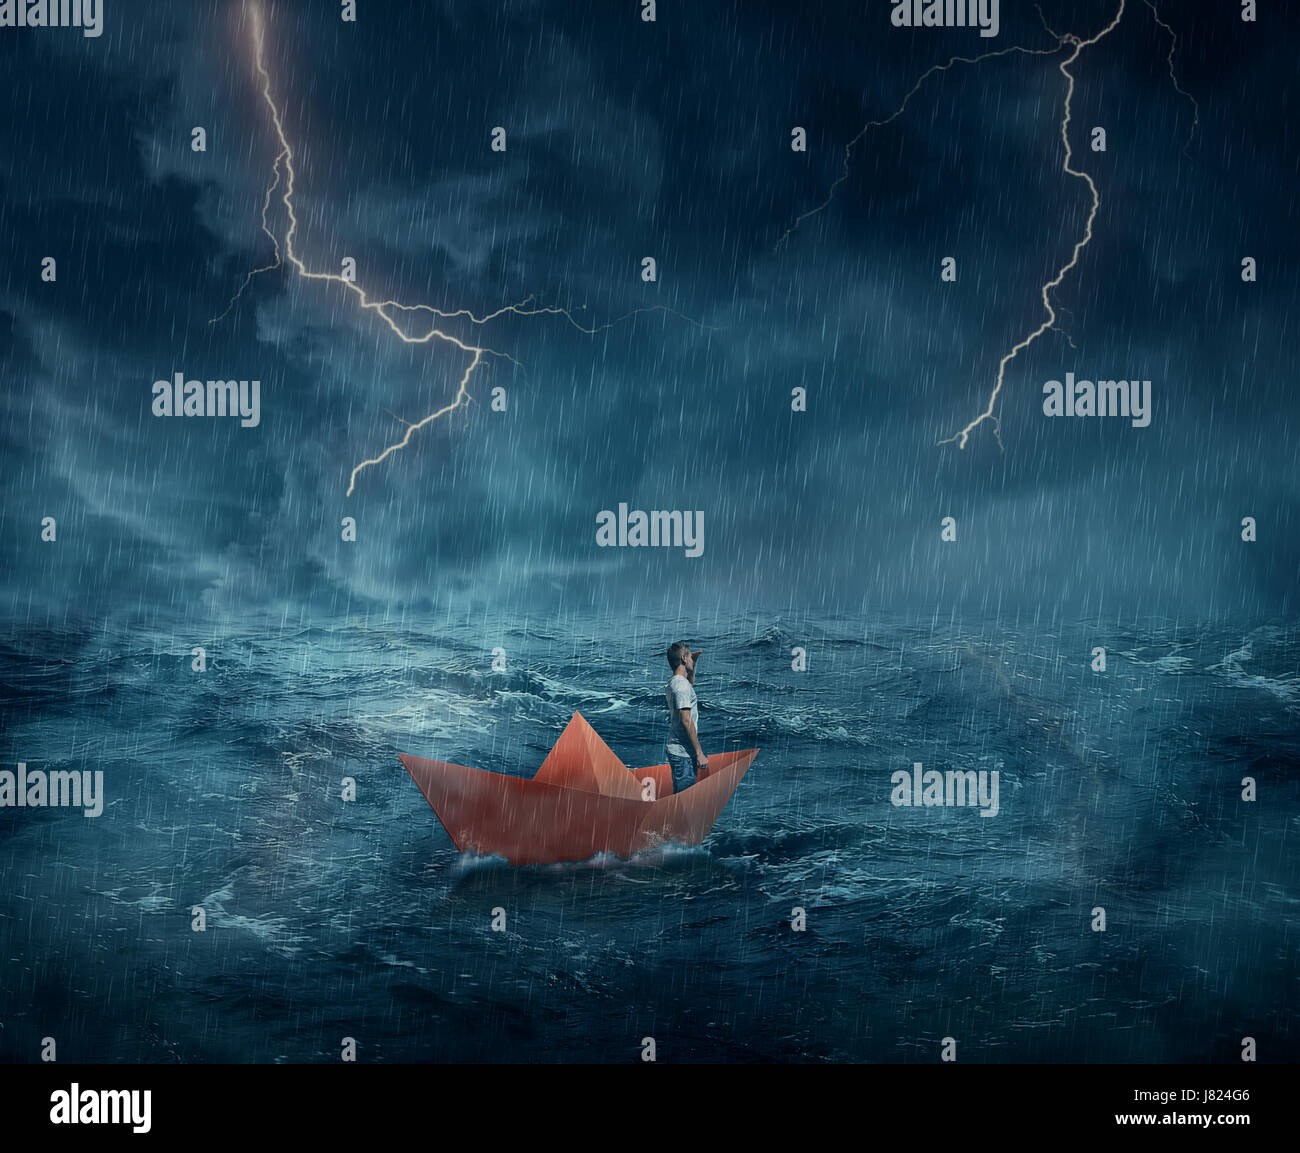 Young boy in a orange paper boat sail lost in the ocean, in a stormy night with lightnings in the sky. Adventure and journey concept. Stock Photo